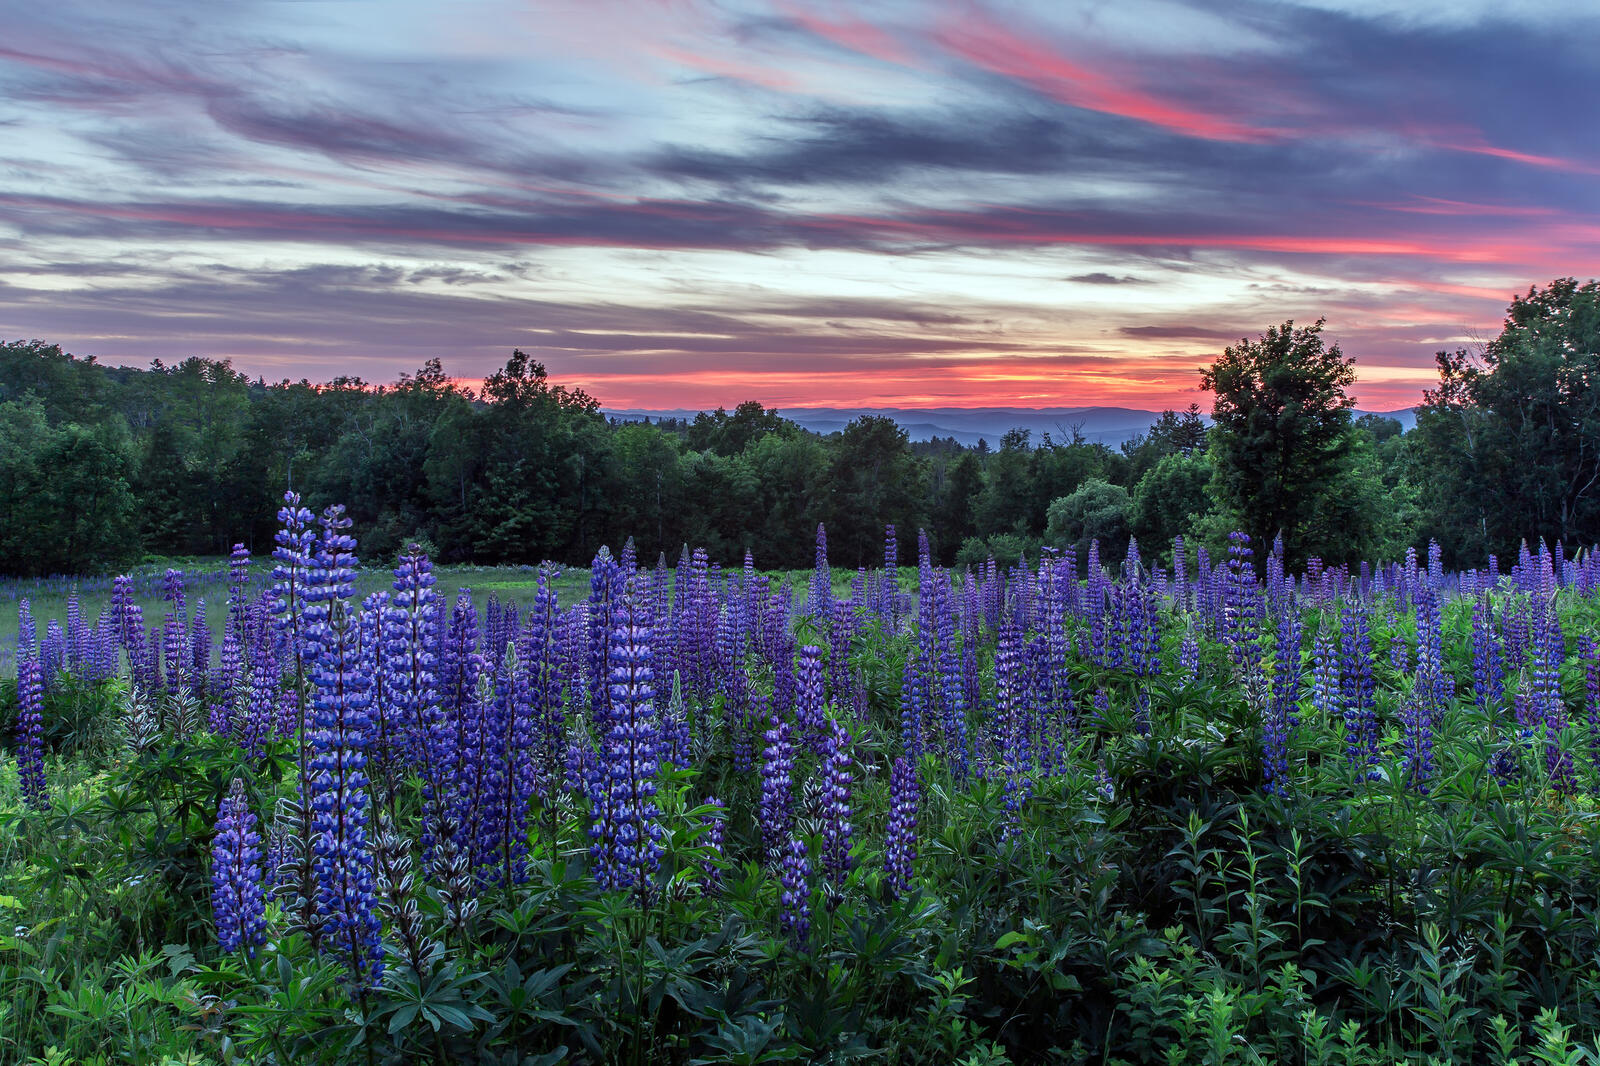 Wallpapers lupine sky sunset on the desktop